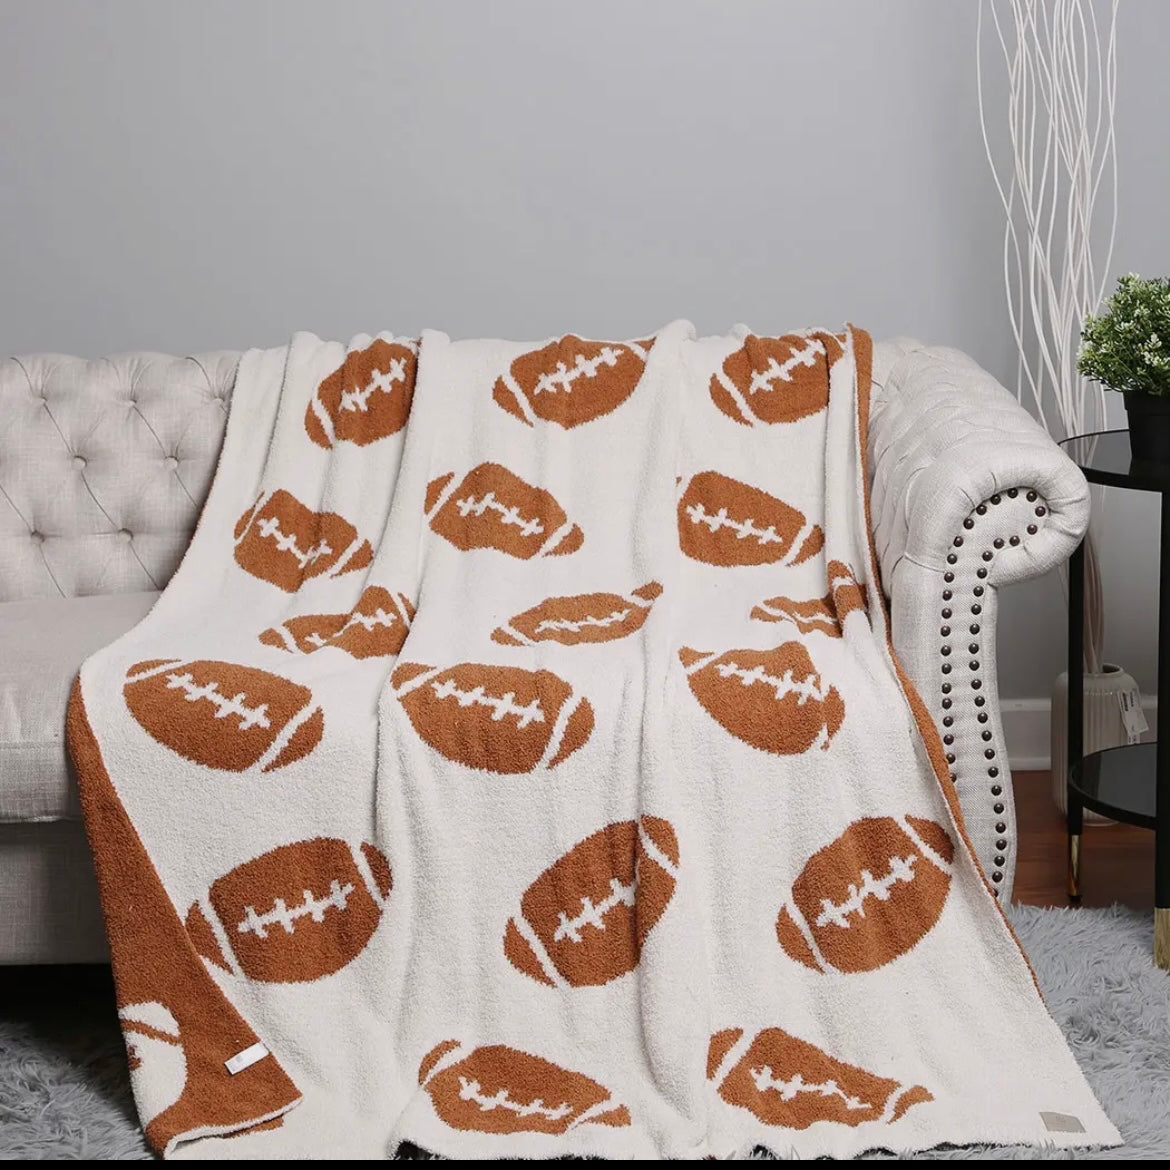 The Softest Ever Football Blanket